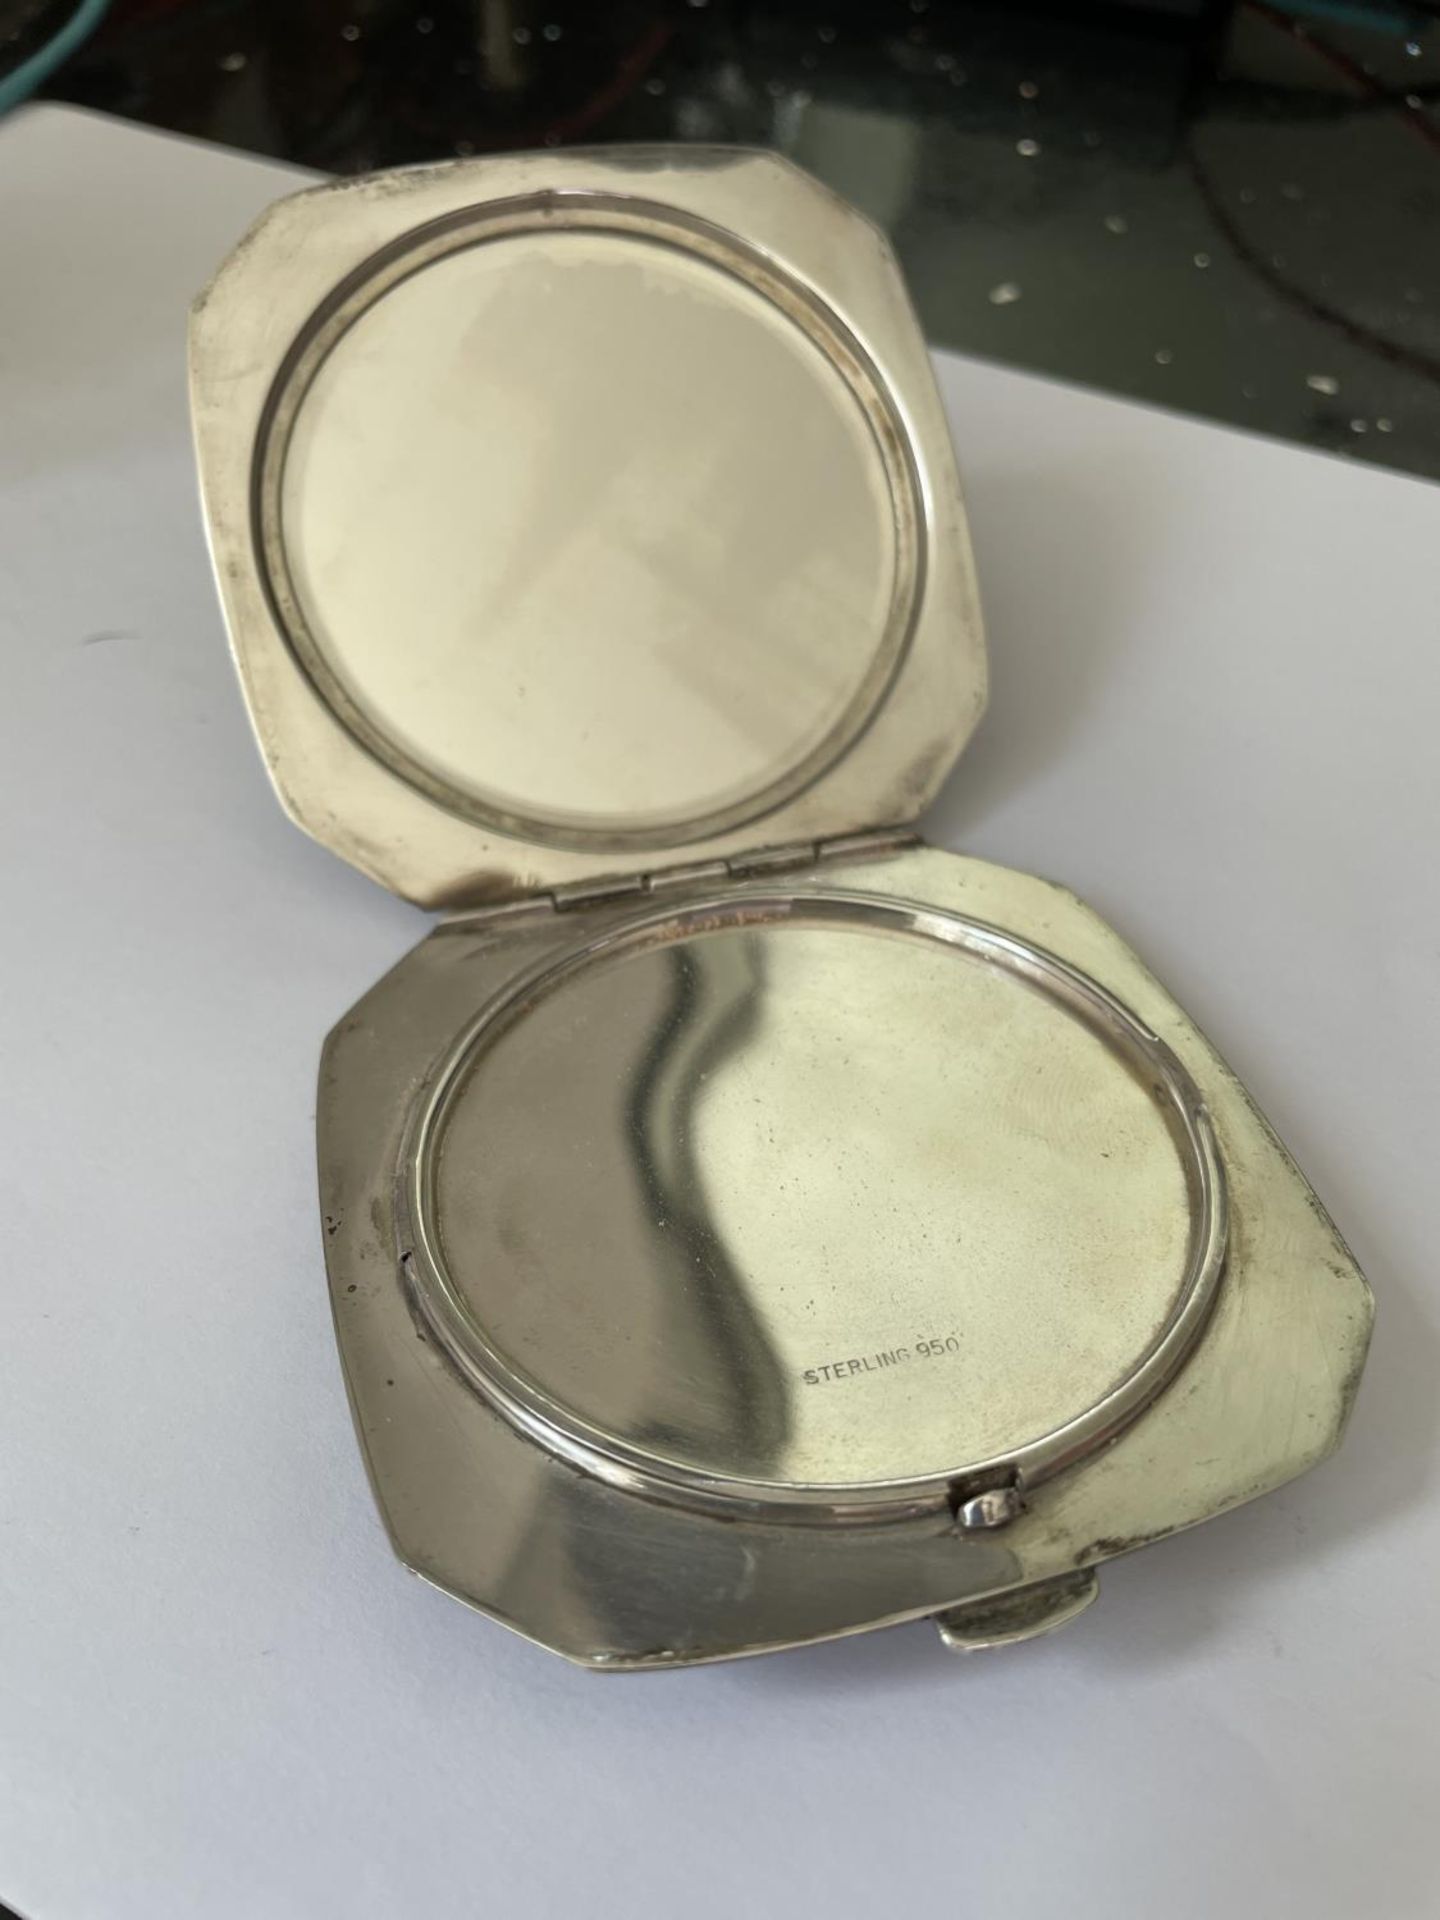 A MARKED STERLING 950 COMPACT GROSS WEIGHT 89.9 GRAMS - Image 3 of 5